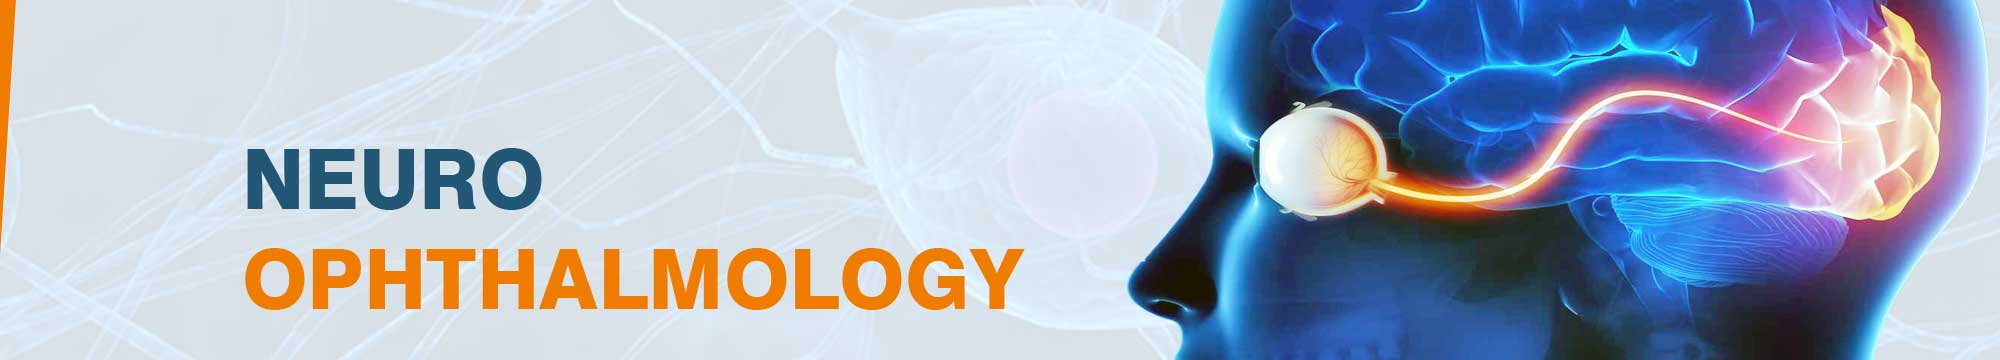 Neuro Ophthalmology in India